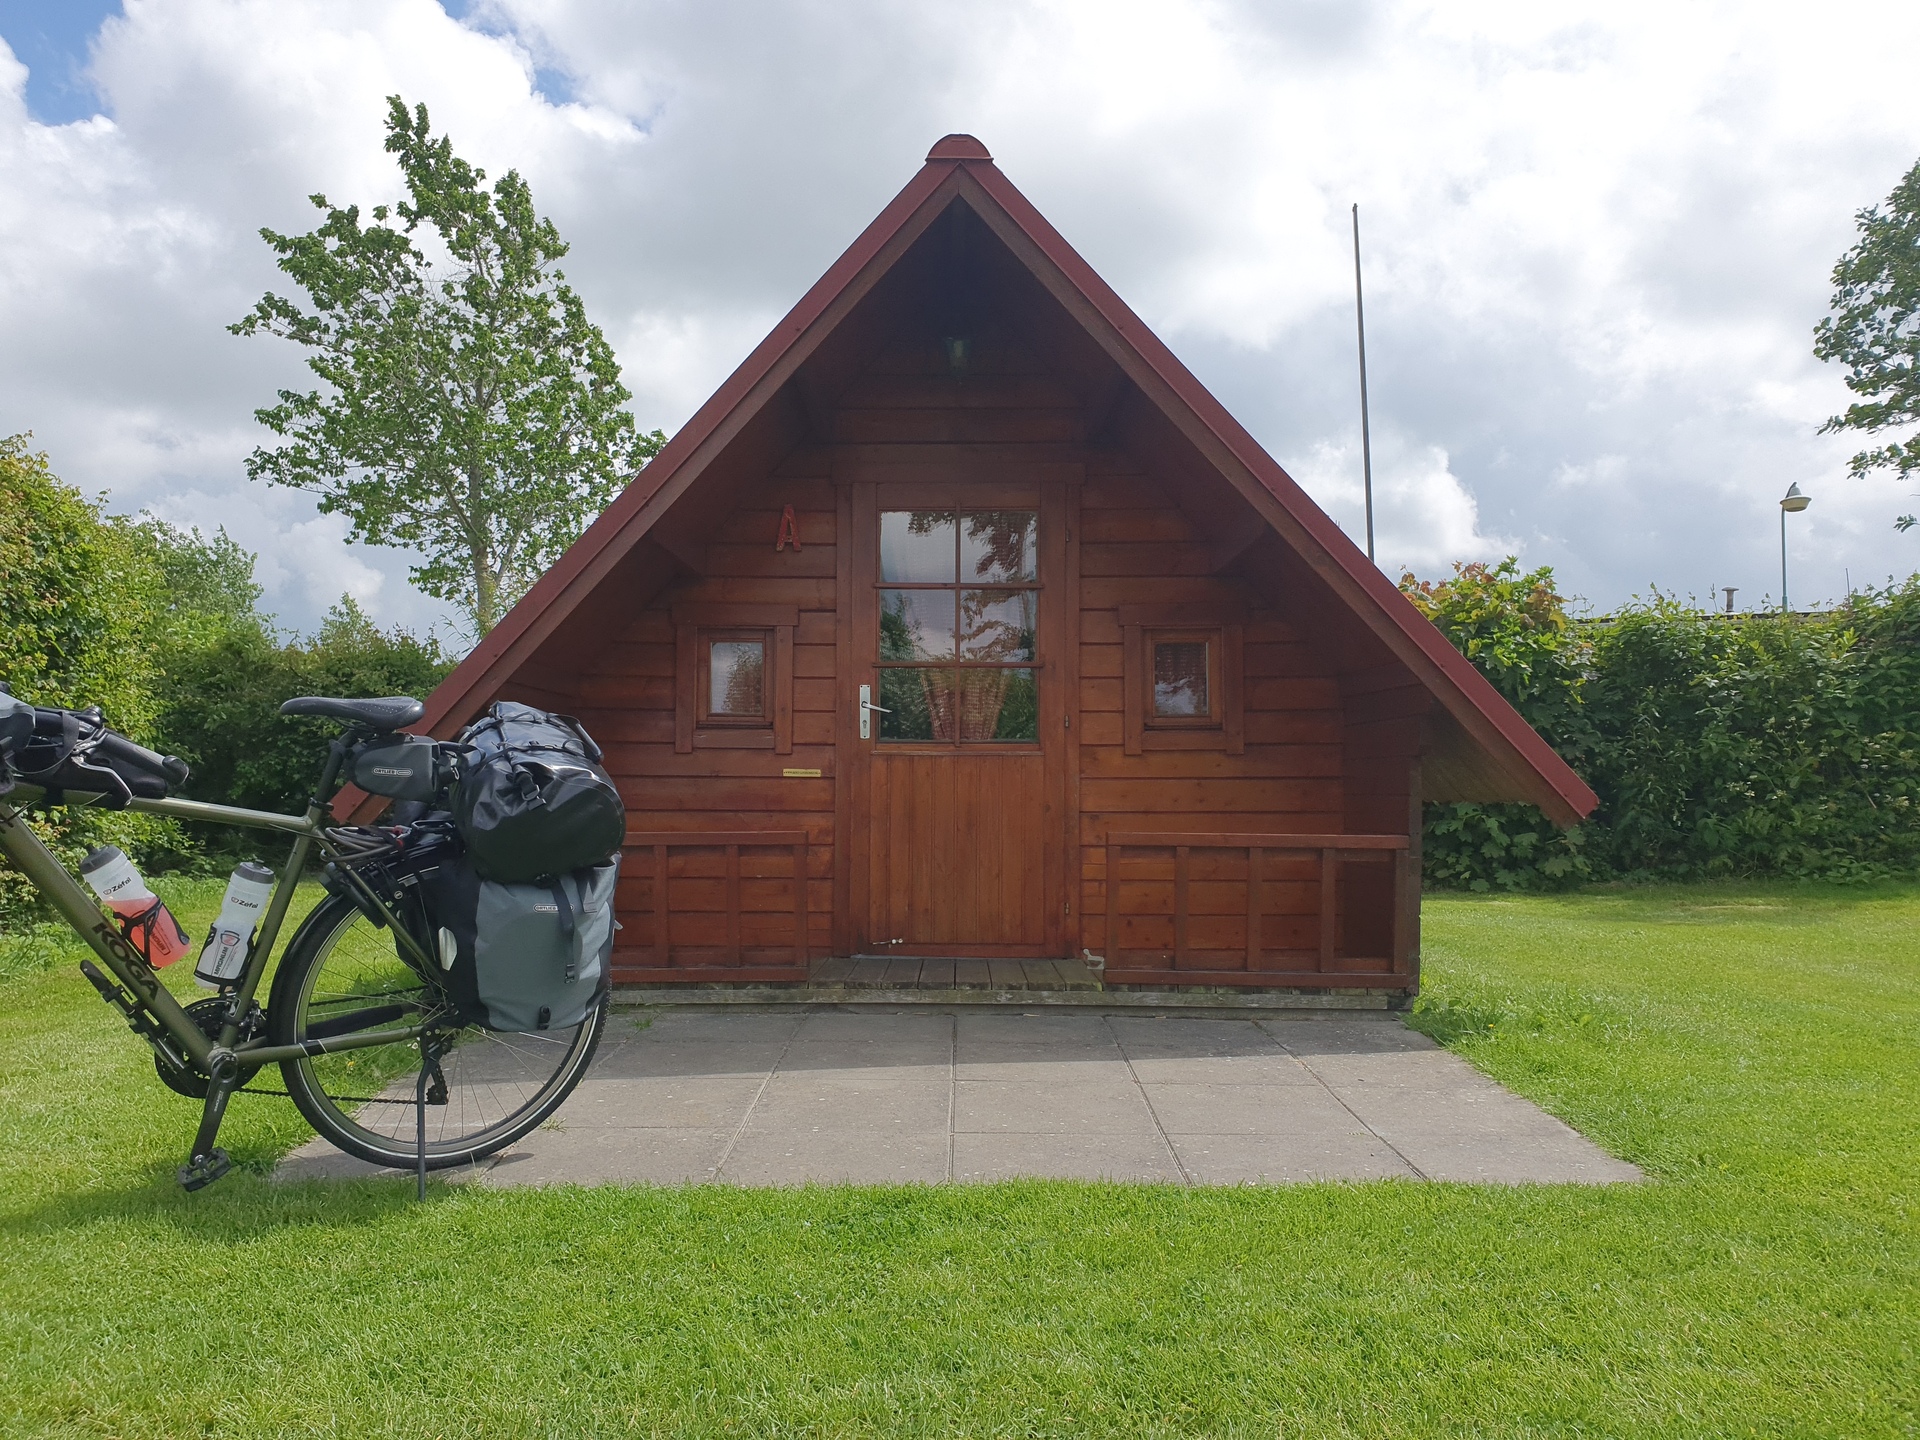 Sleeping cabin with my touring bike in front of it